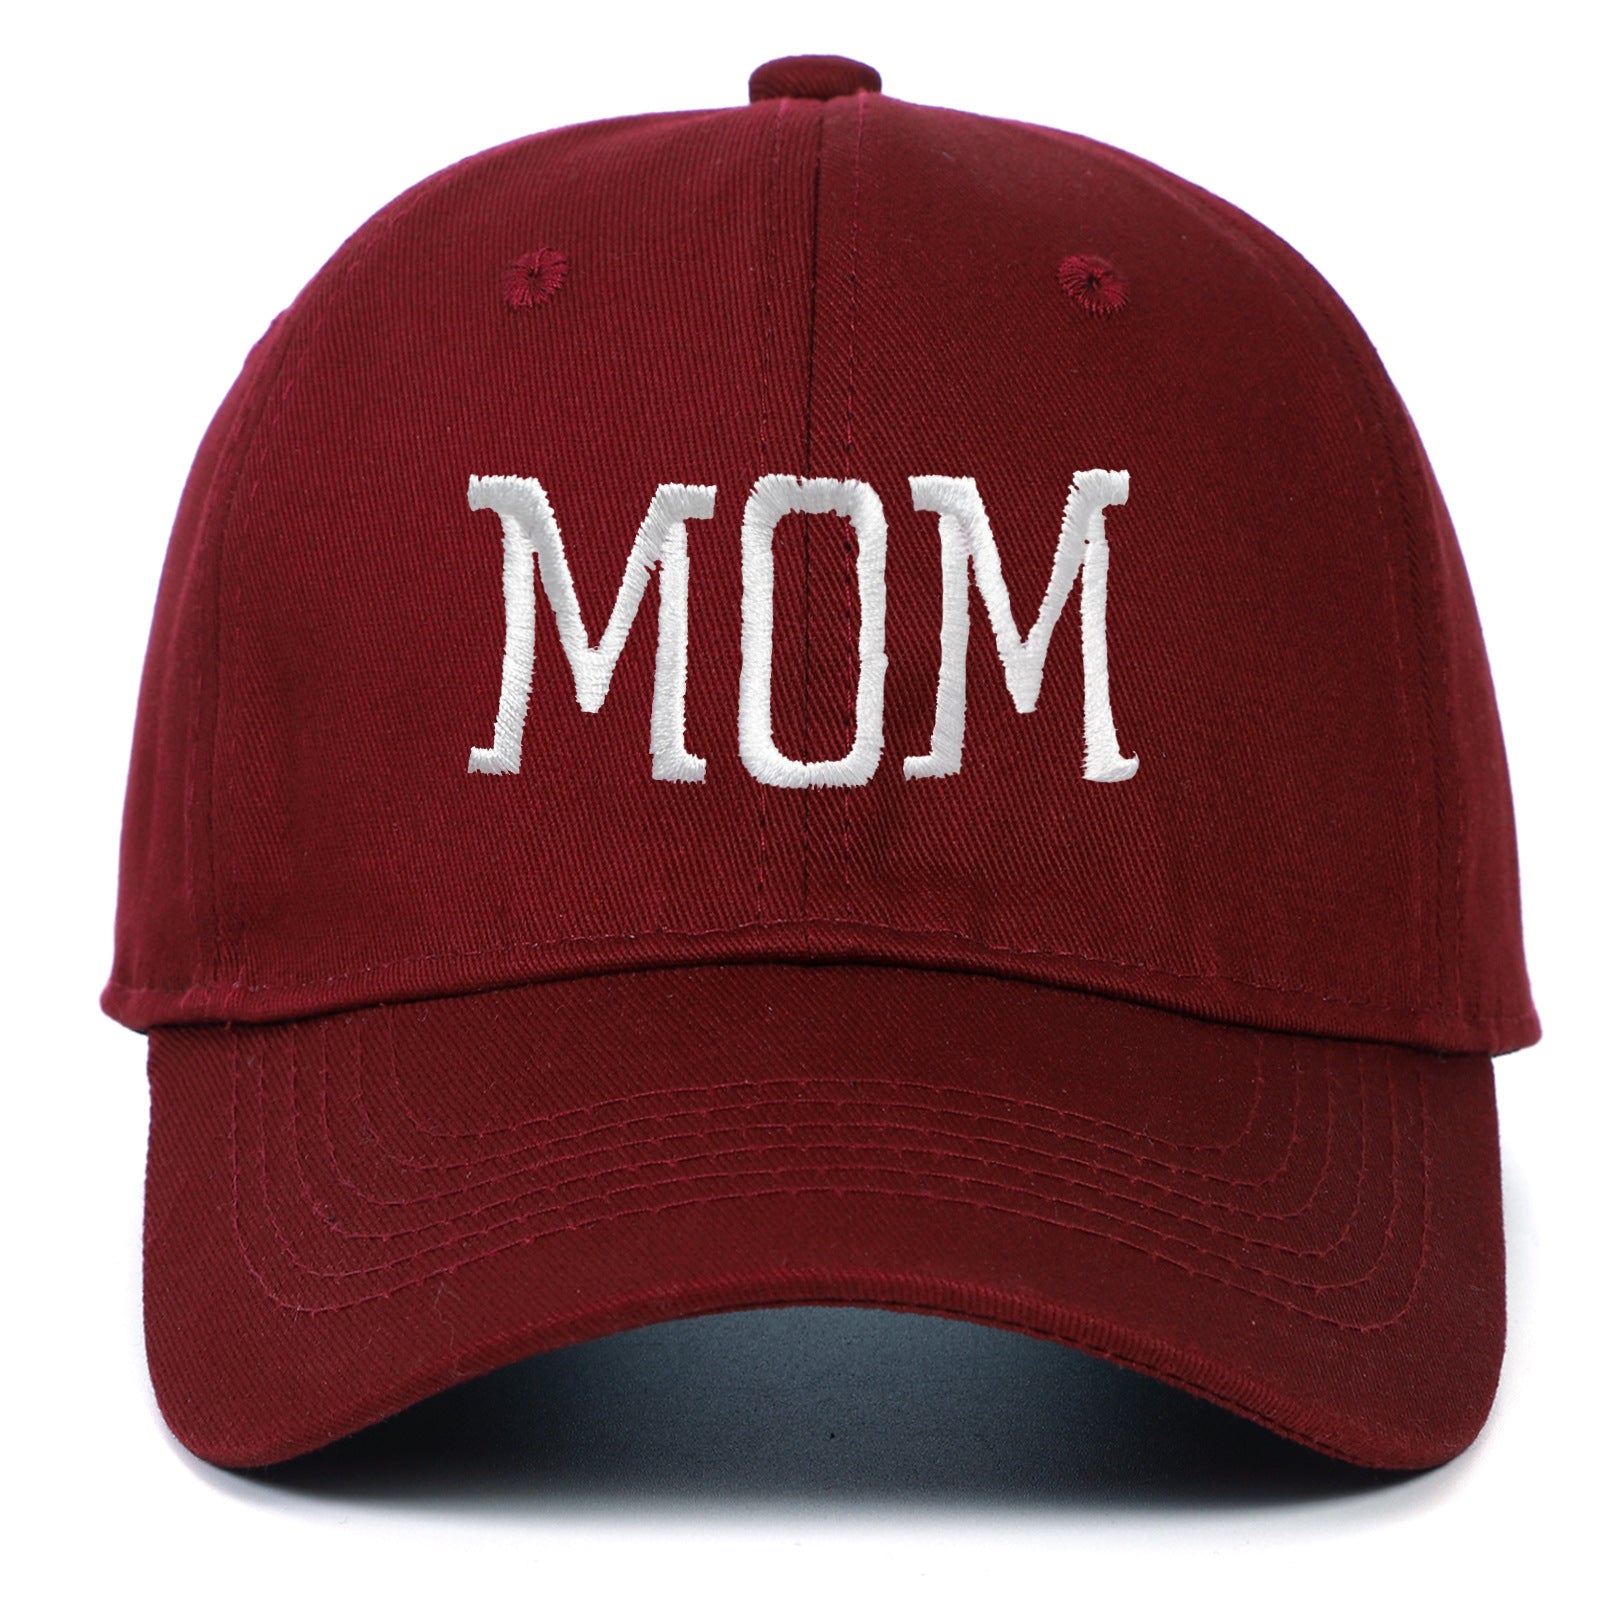 Cotton Soft Top Embroidered Baseball Hat